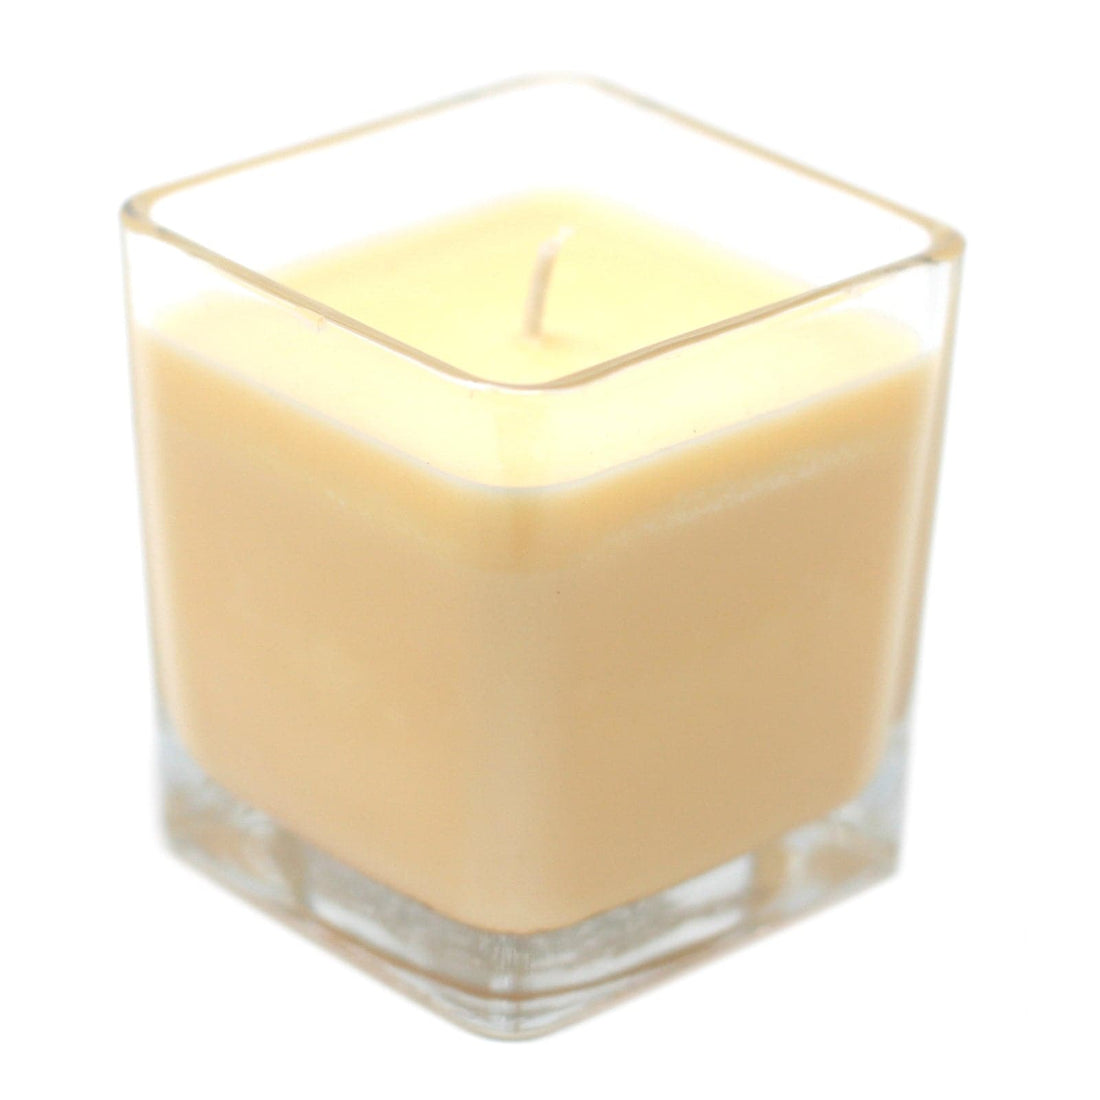 White Label Soy Wax Jar Candle - Grapefruit & Ginger - best price from Maltashopper.com WLSOYC-06